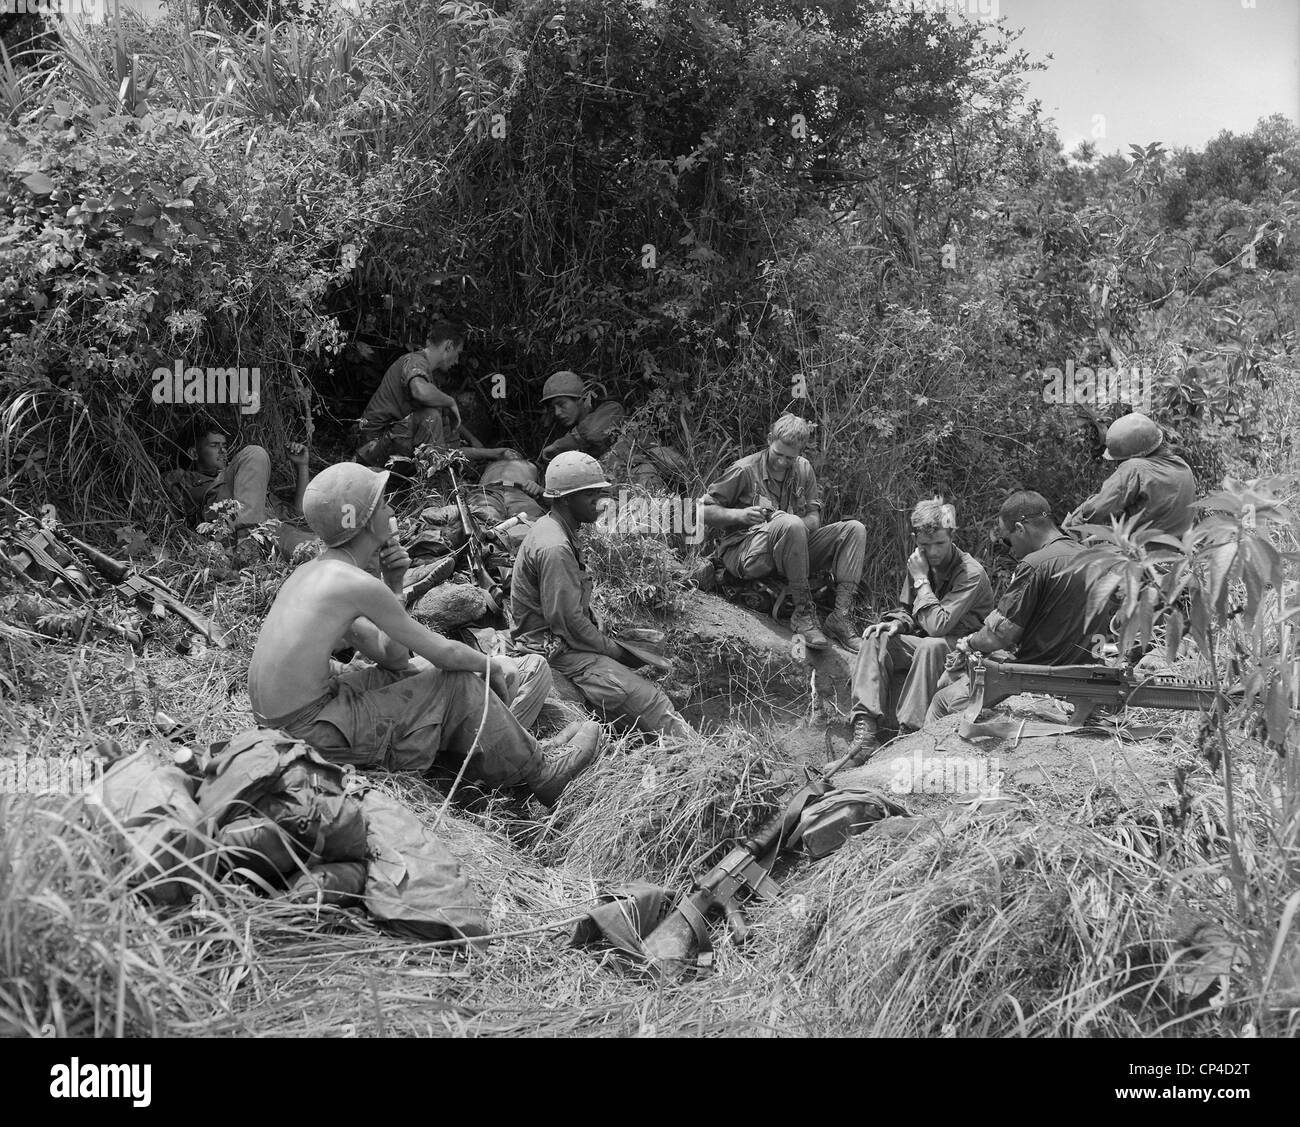 Vietnam War. Soldiers of the 101st Airborne Division, take a break from jungle fighting east of Tam Ky, the capital city of Stock Photo